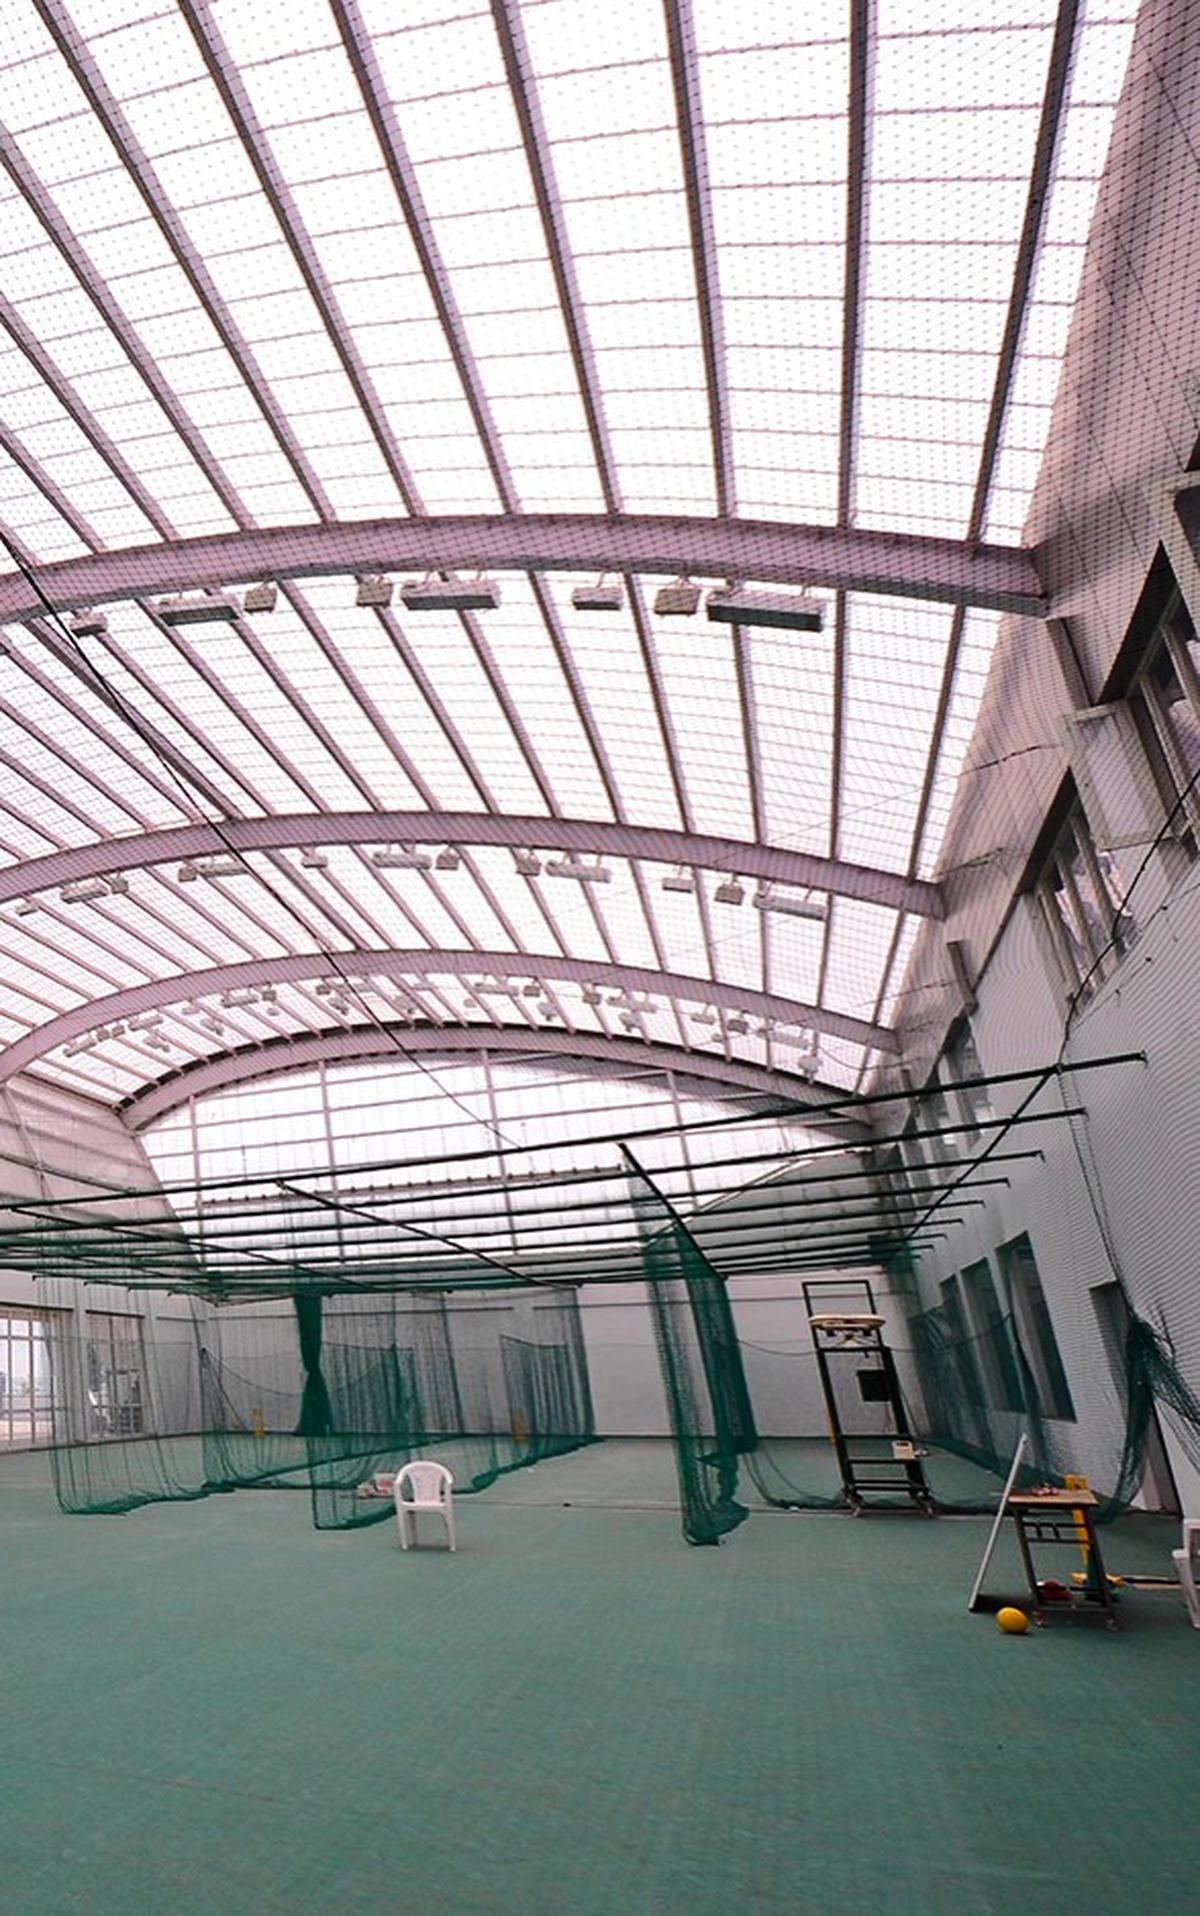 Due to the weather conditions, excellent indoor facilities are also available, including a state-of-the-art gymnasium with rehab facilities, which has received praise from visiting players.